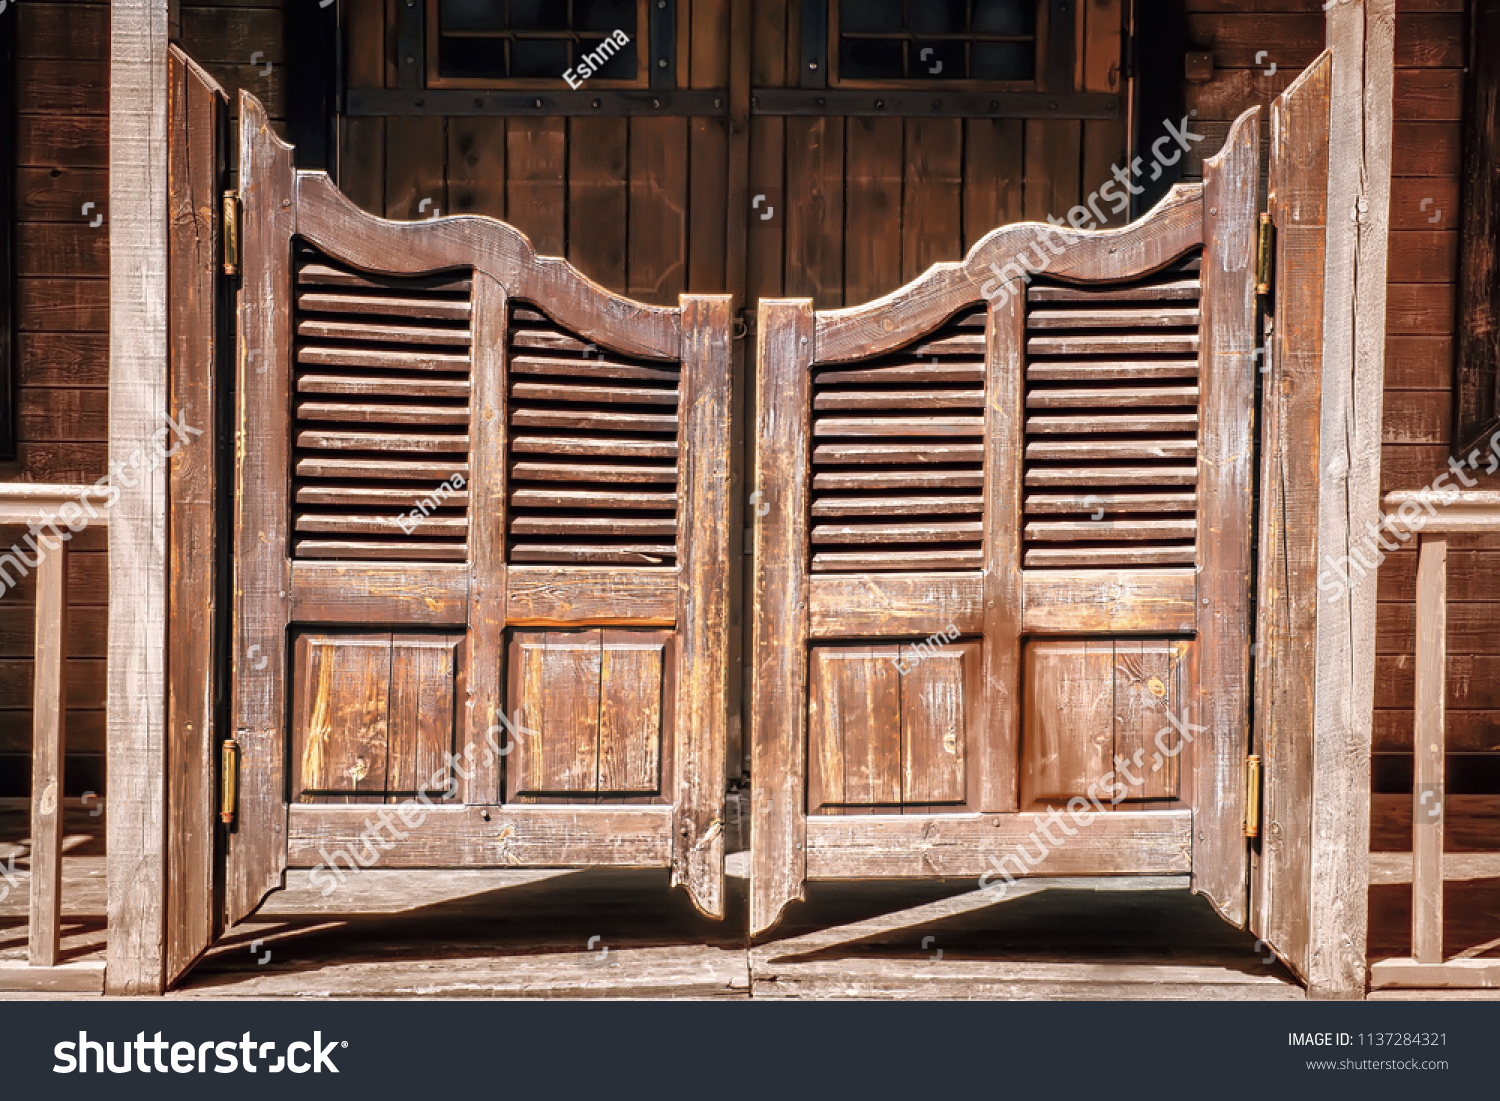 Old saloon entrance with swinging doors #1137284321